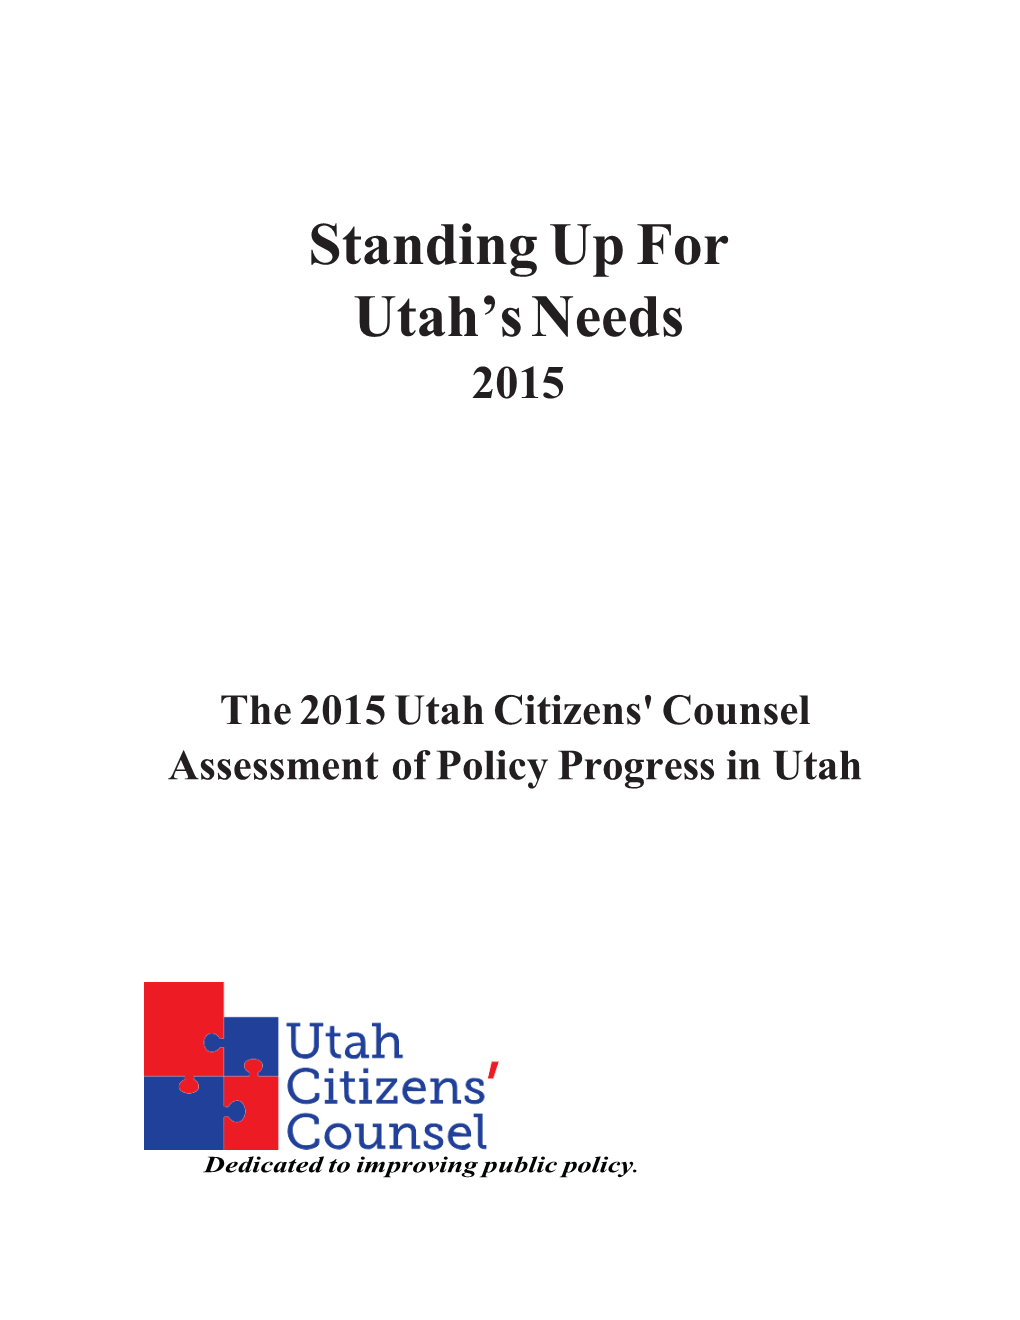 The 2015 Utah Citizens' Counsel Assessment of Policy Progress in Utah